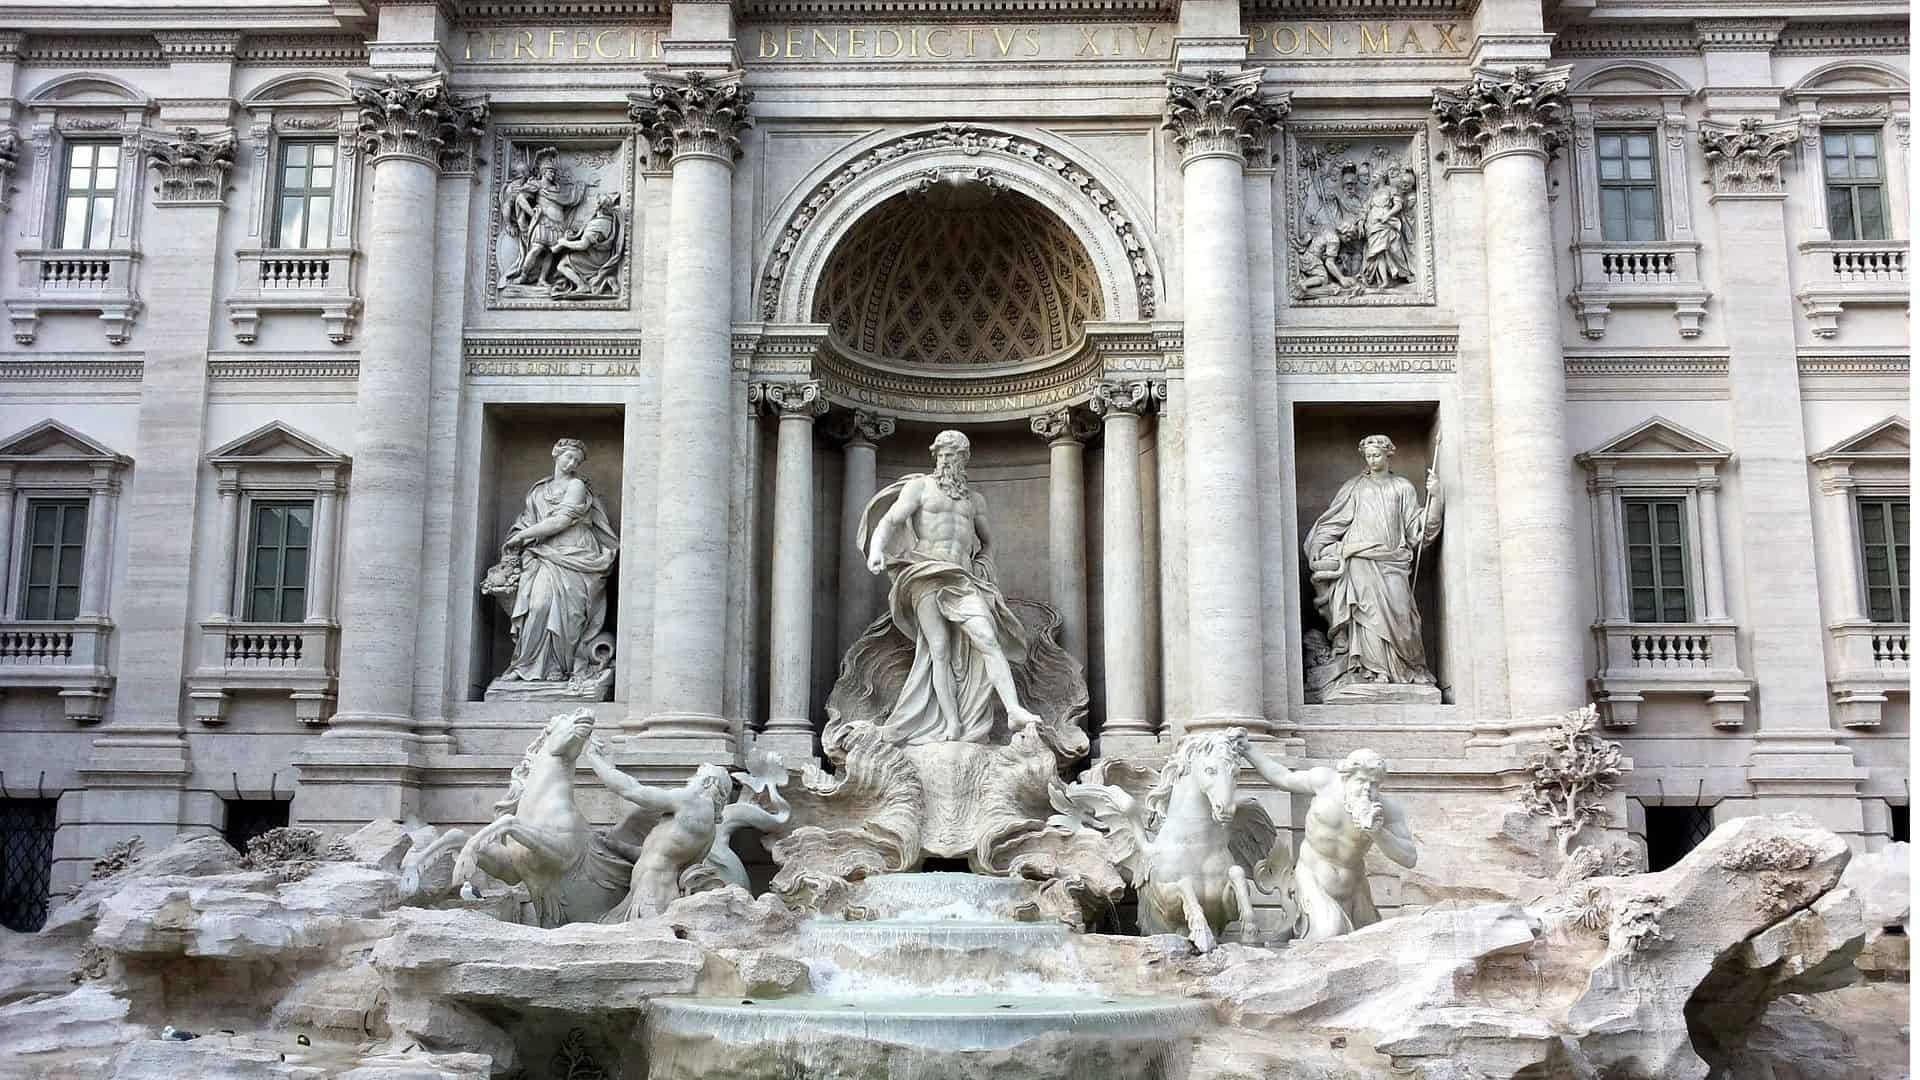 Sculptures of the Trevi Fountain in Rome